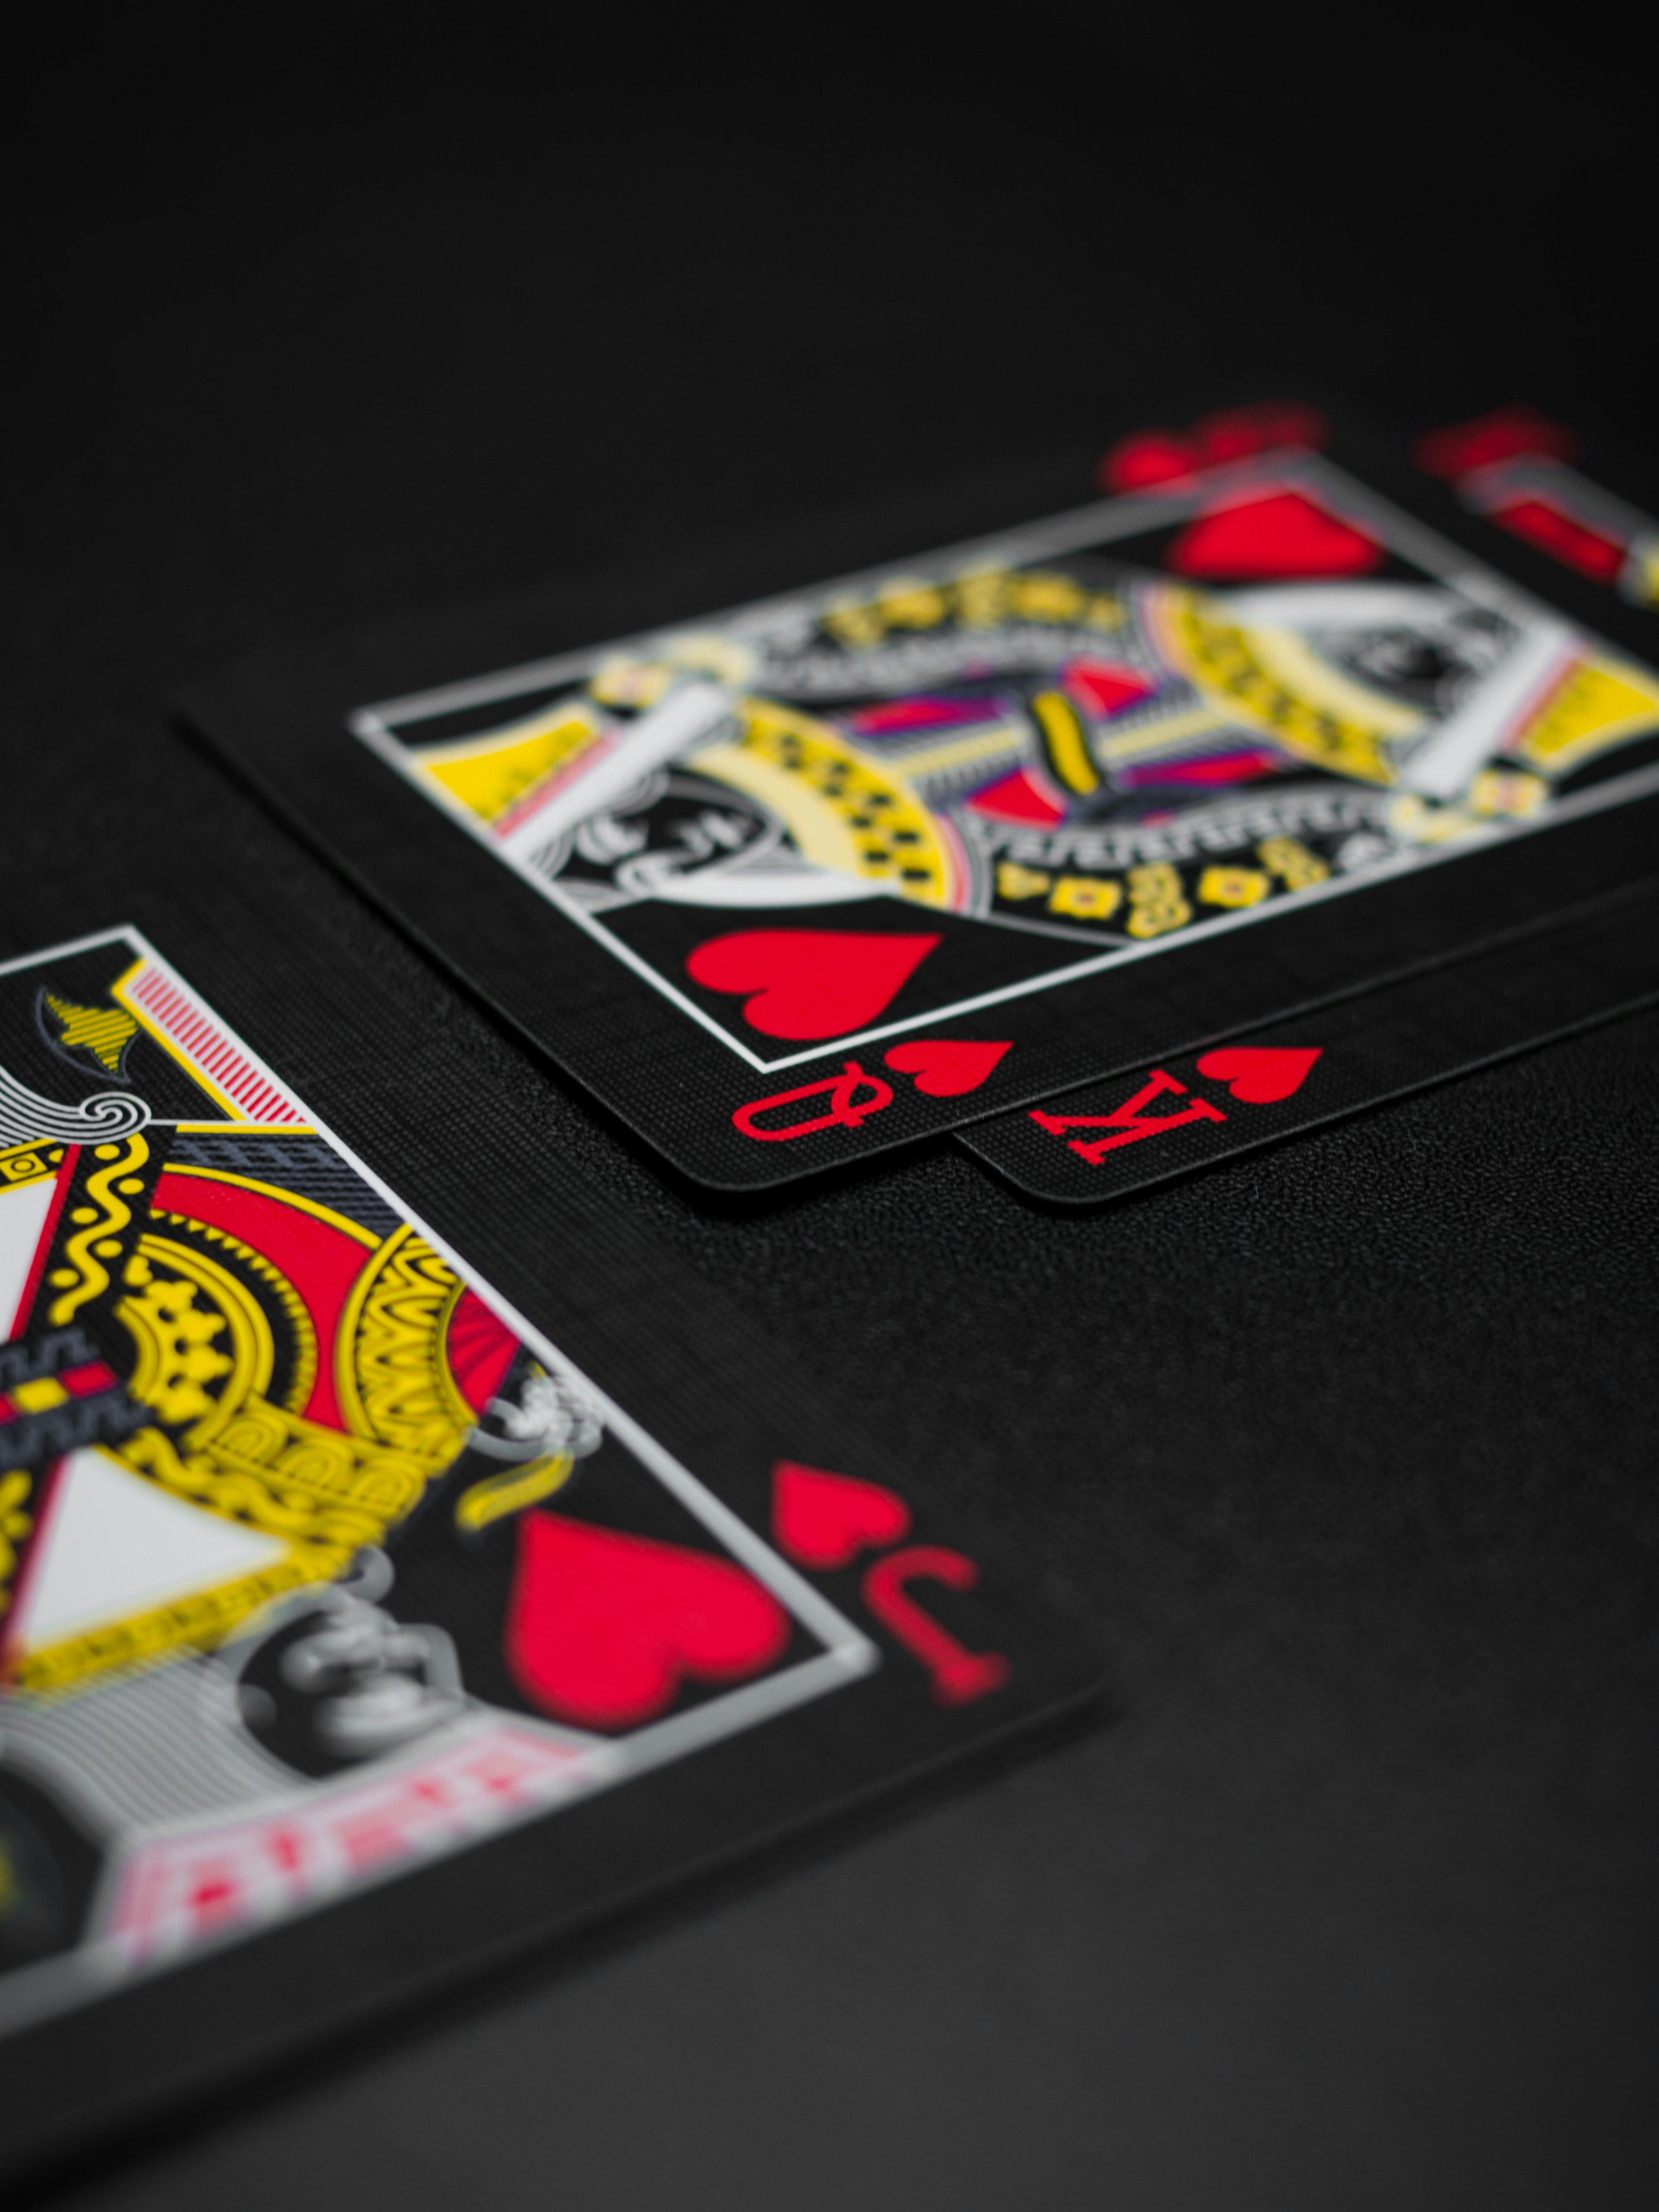 Four Ace Game Cards \u00b7 Free Stock Photo